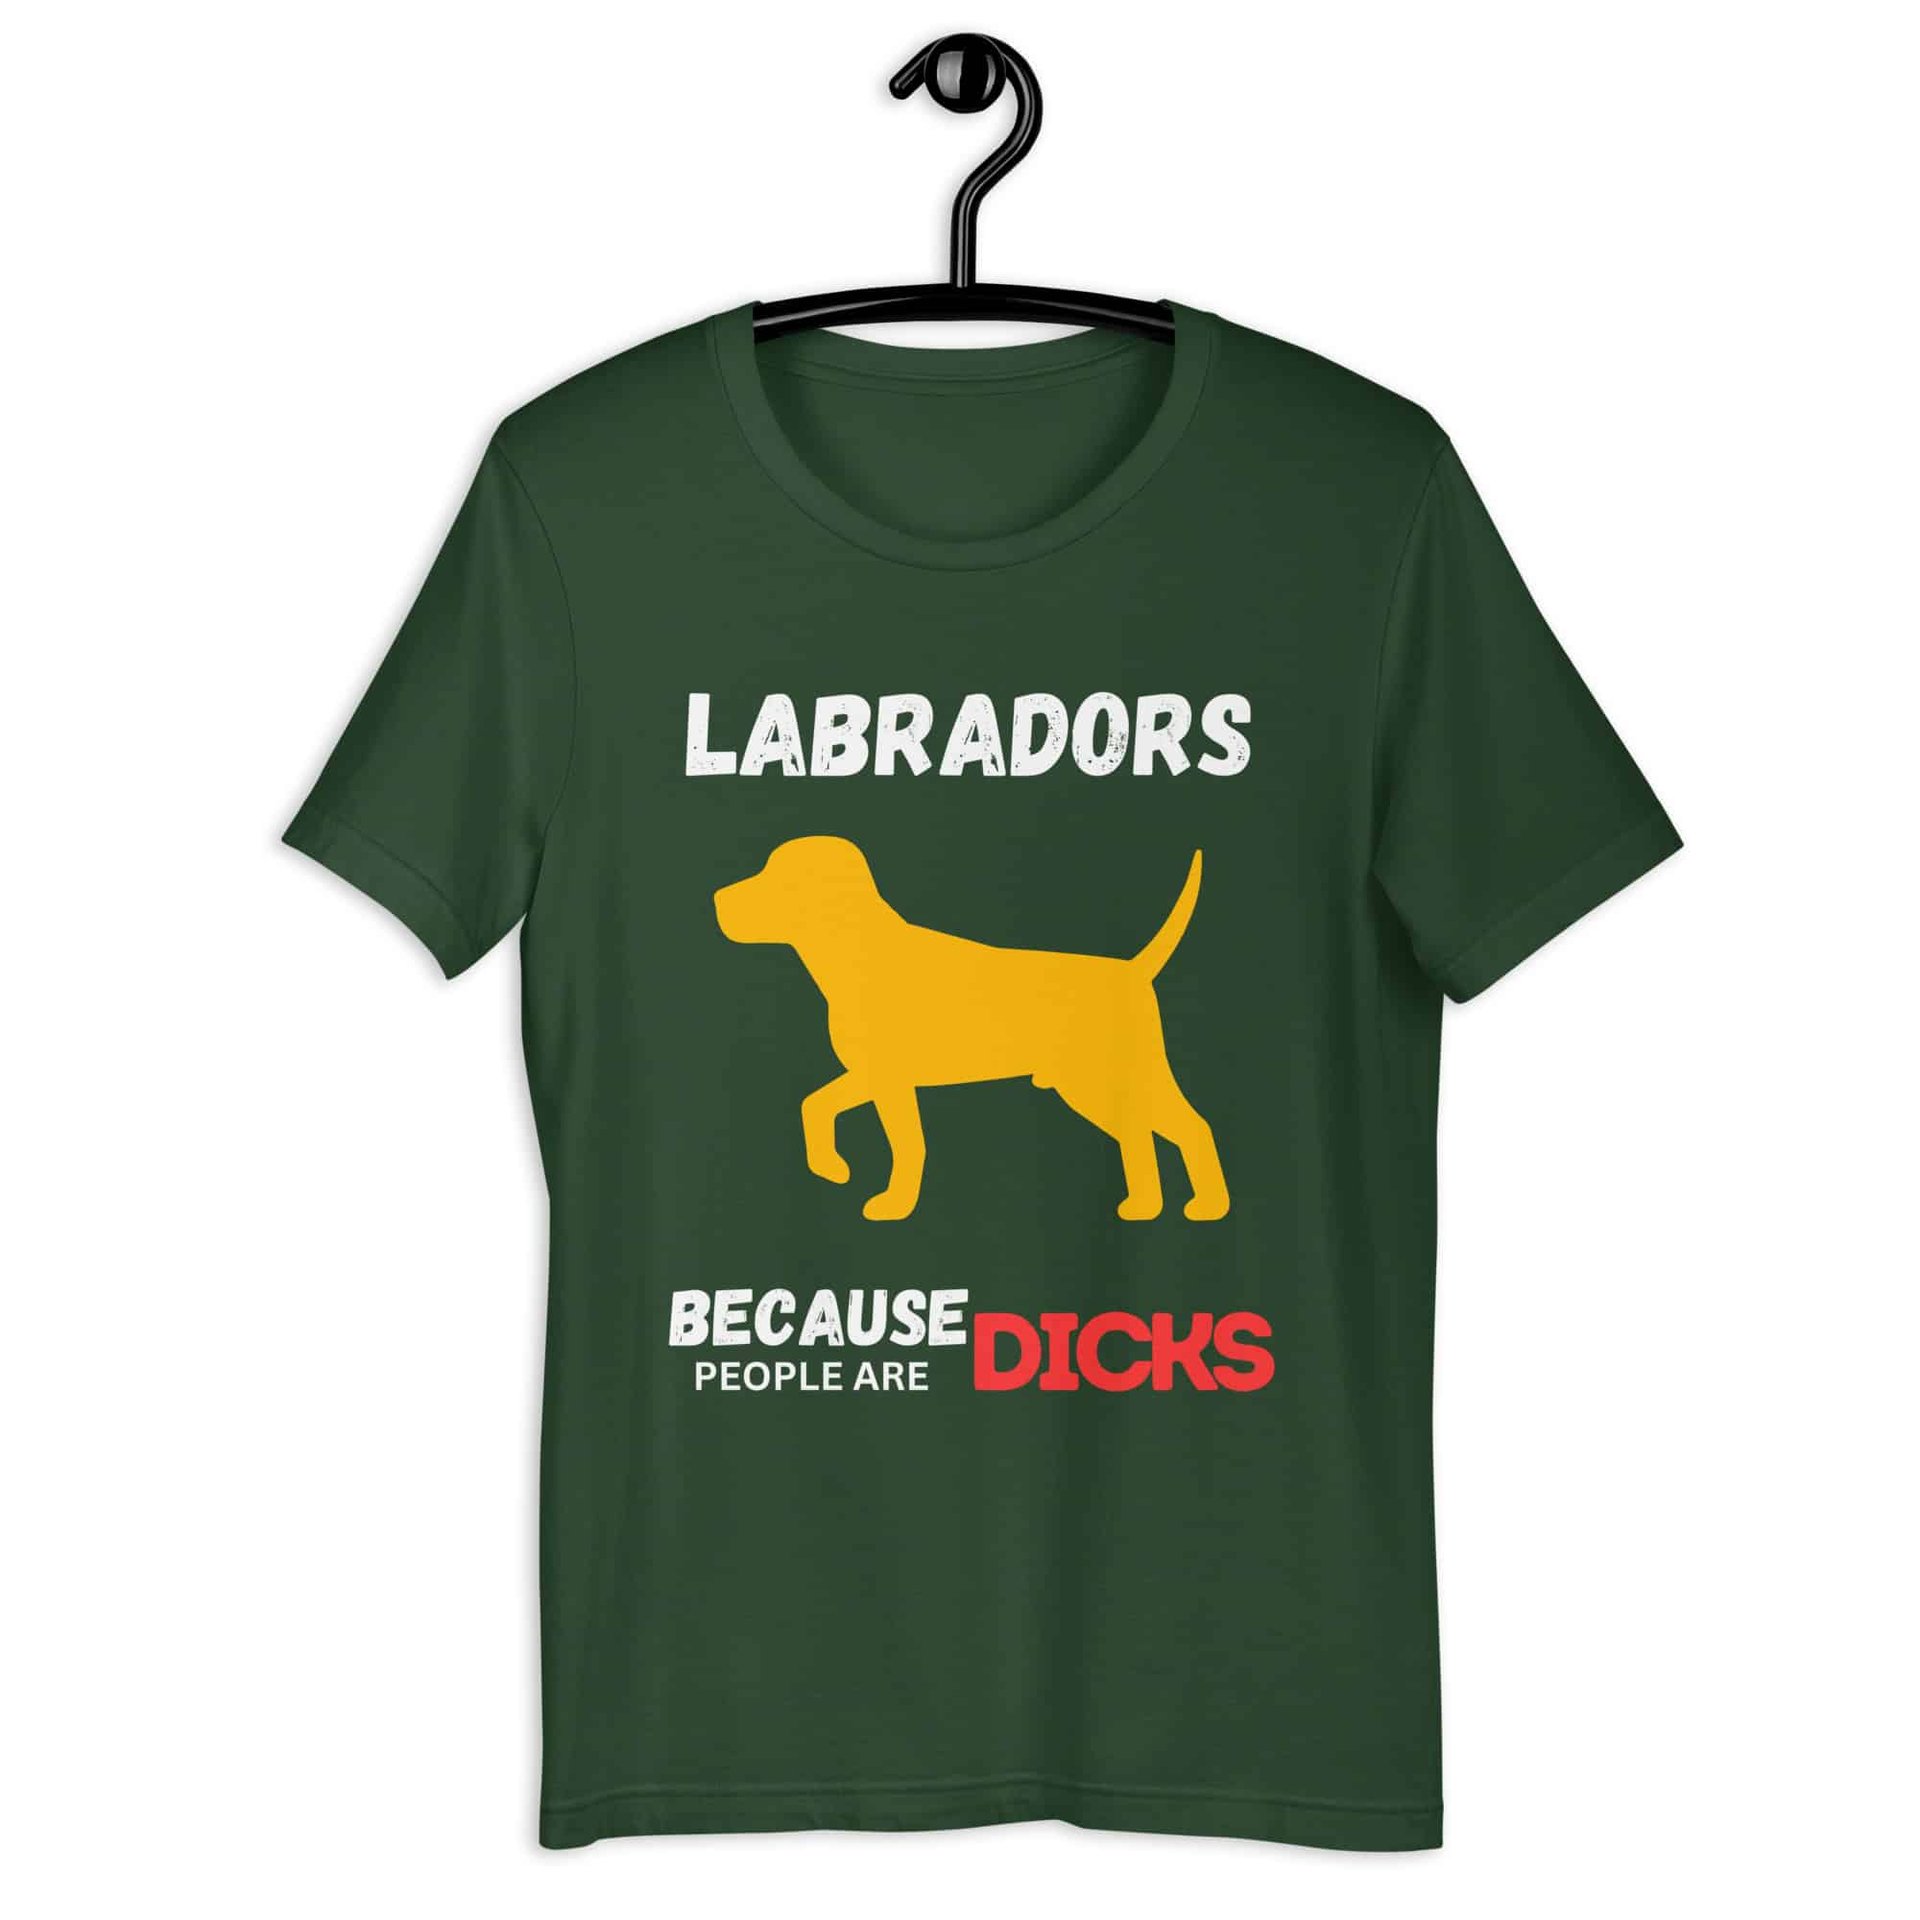 Labrador Because People Are Dicks Unisex T-Shirt Green